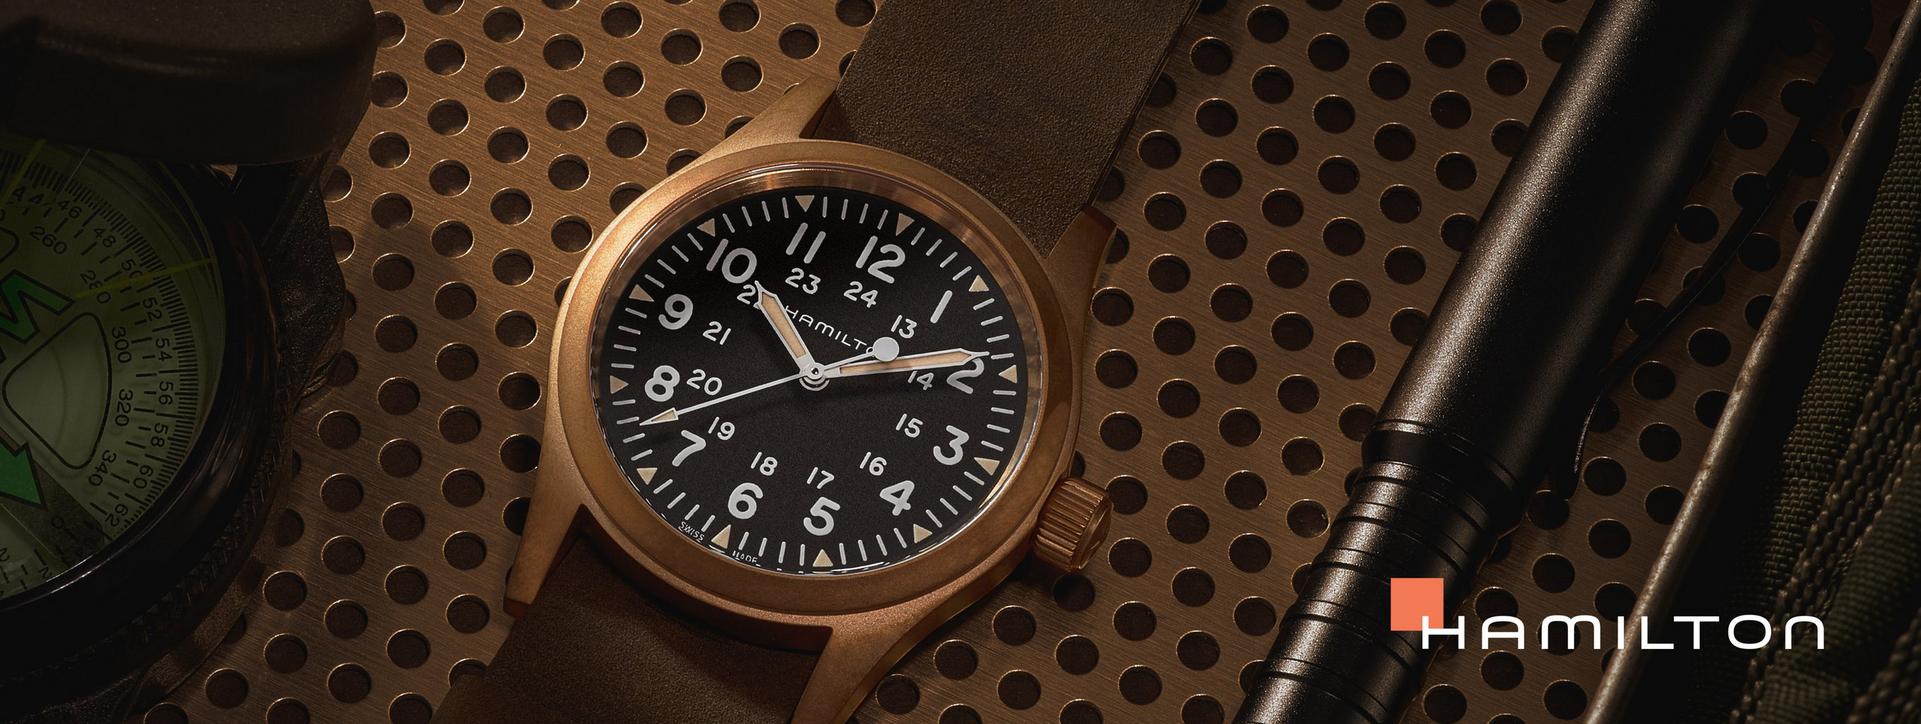 Hamilton, Brown Leather Watch with Blue Face